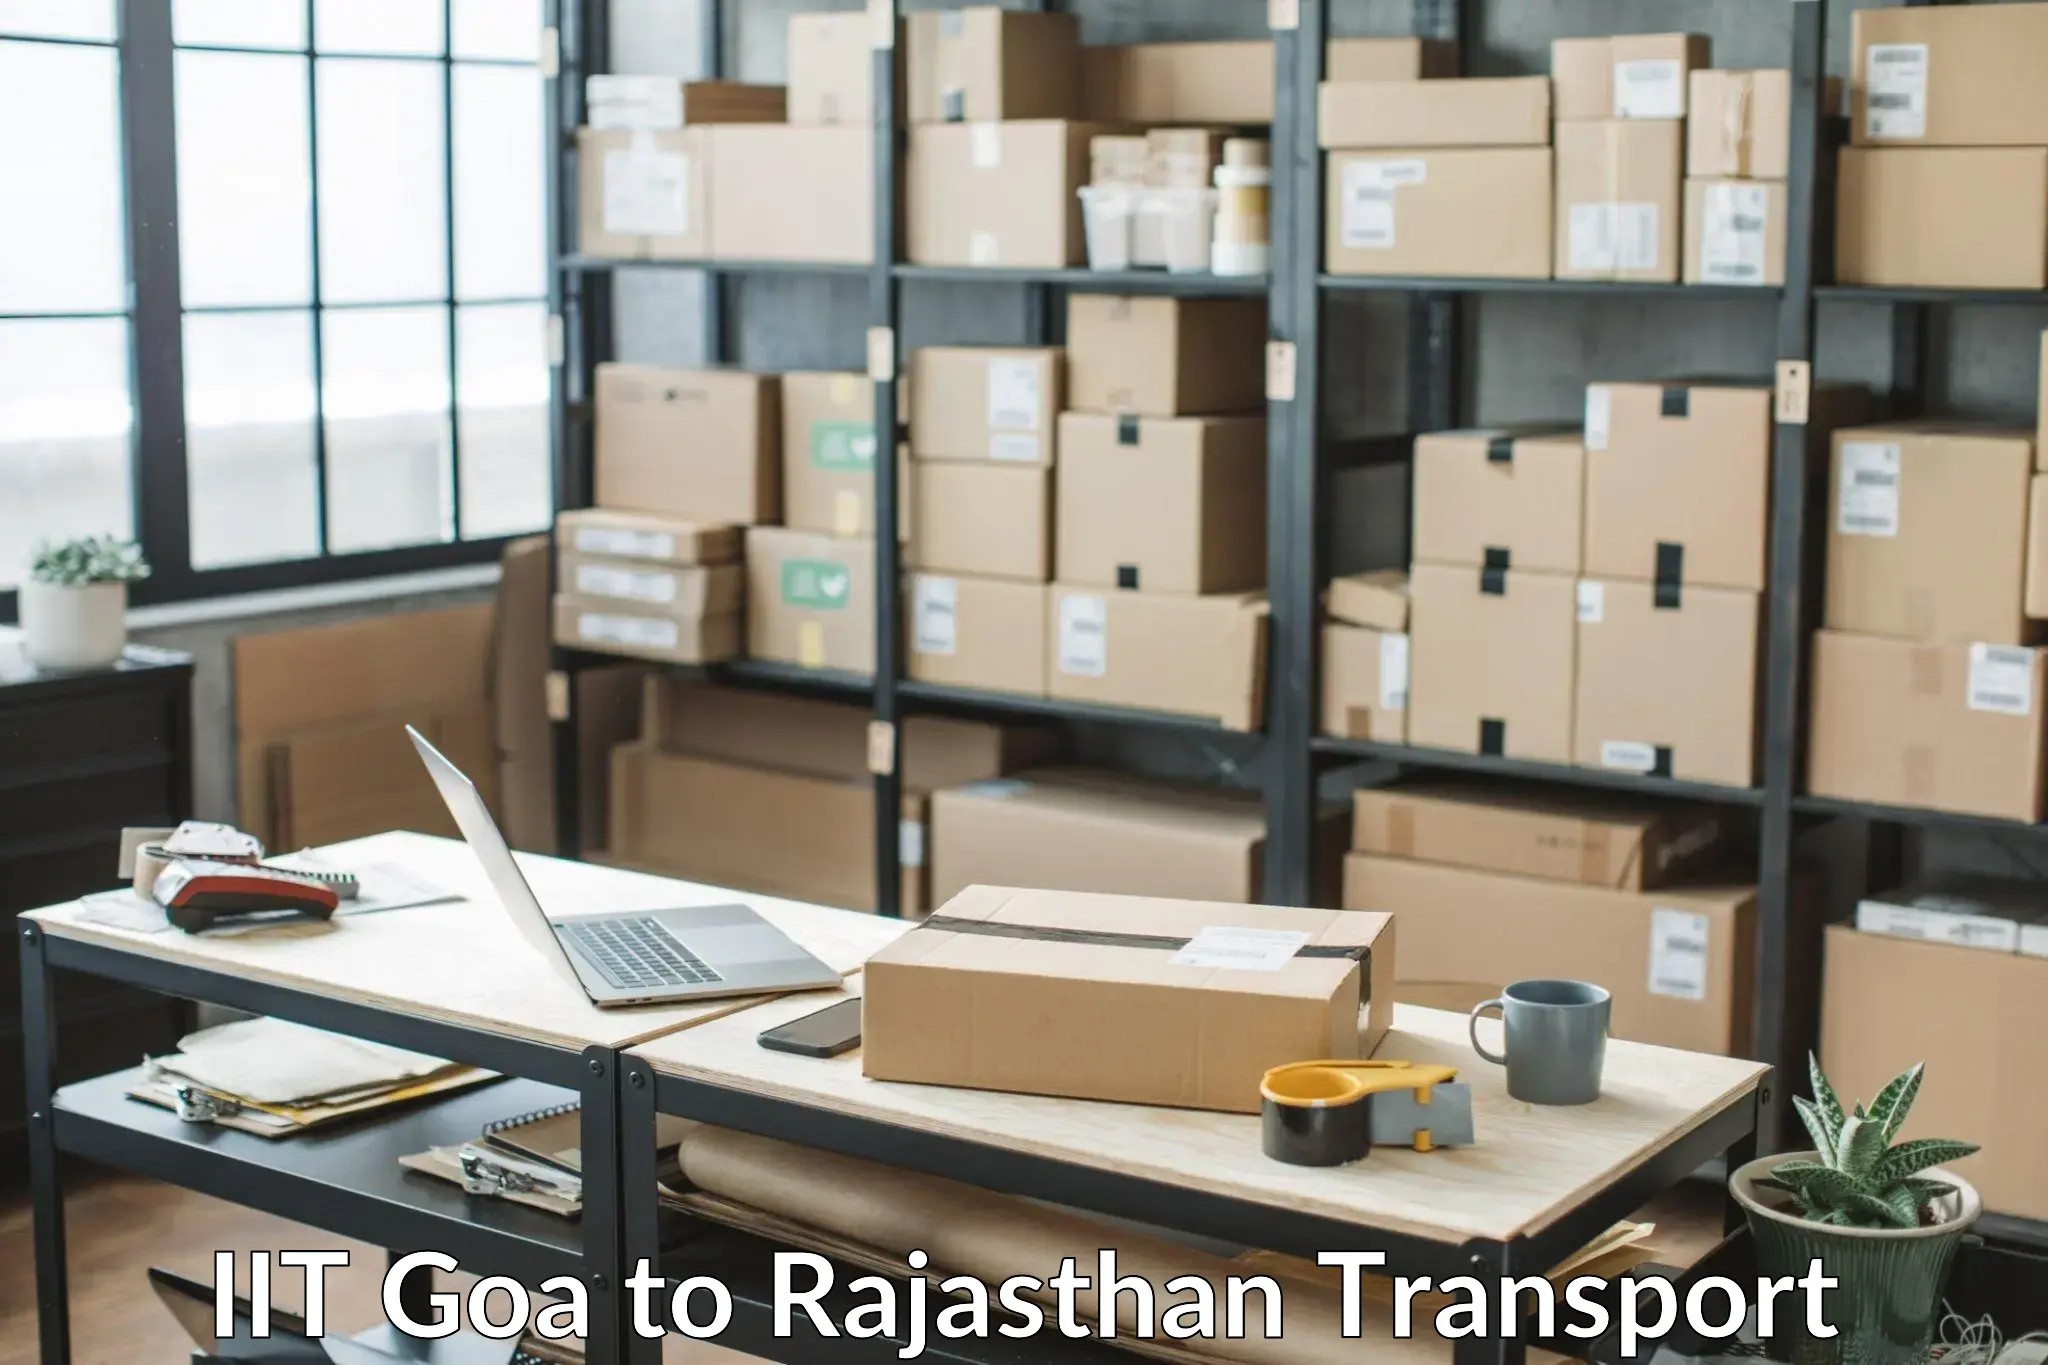 Daily parcel service transport IIT Goa to Nohar